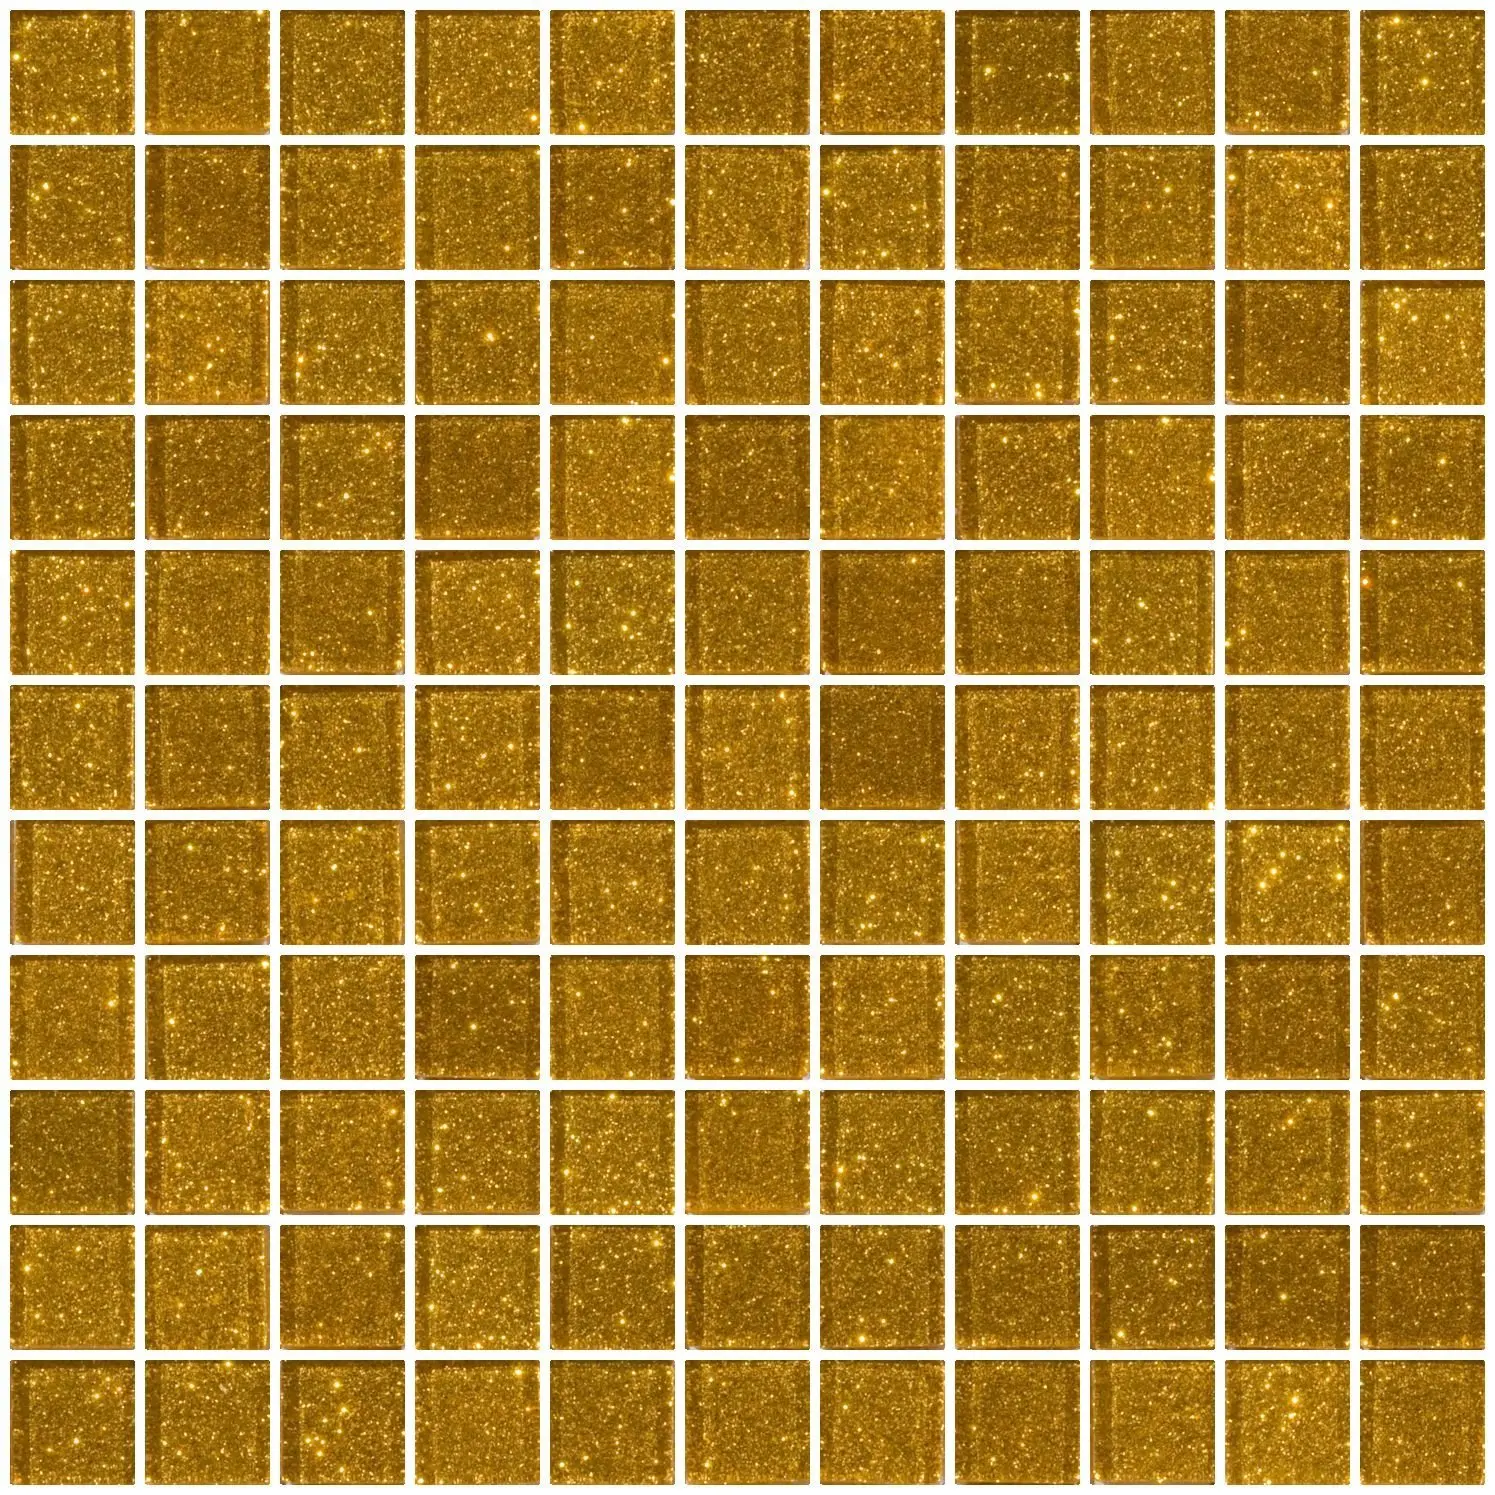 Buy Susan Jablon Mosaics 1 Inch Gold And Silver Weave Metallic Glass Tile Reset In Offset Layout In Cheap Price On Alibaba Com